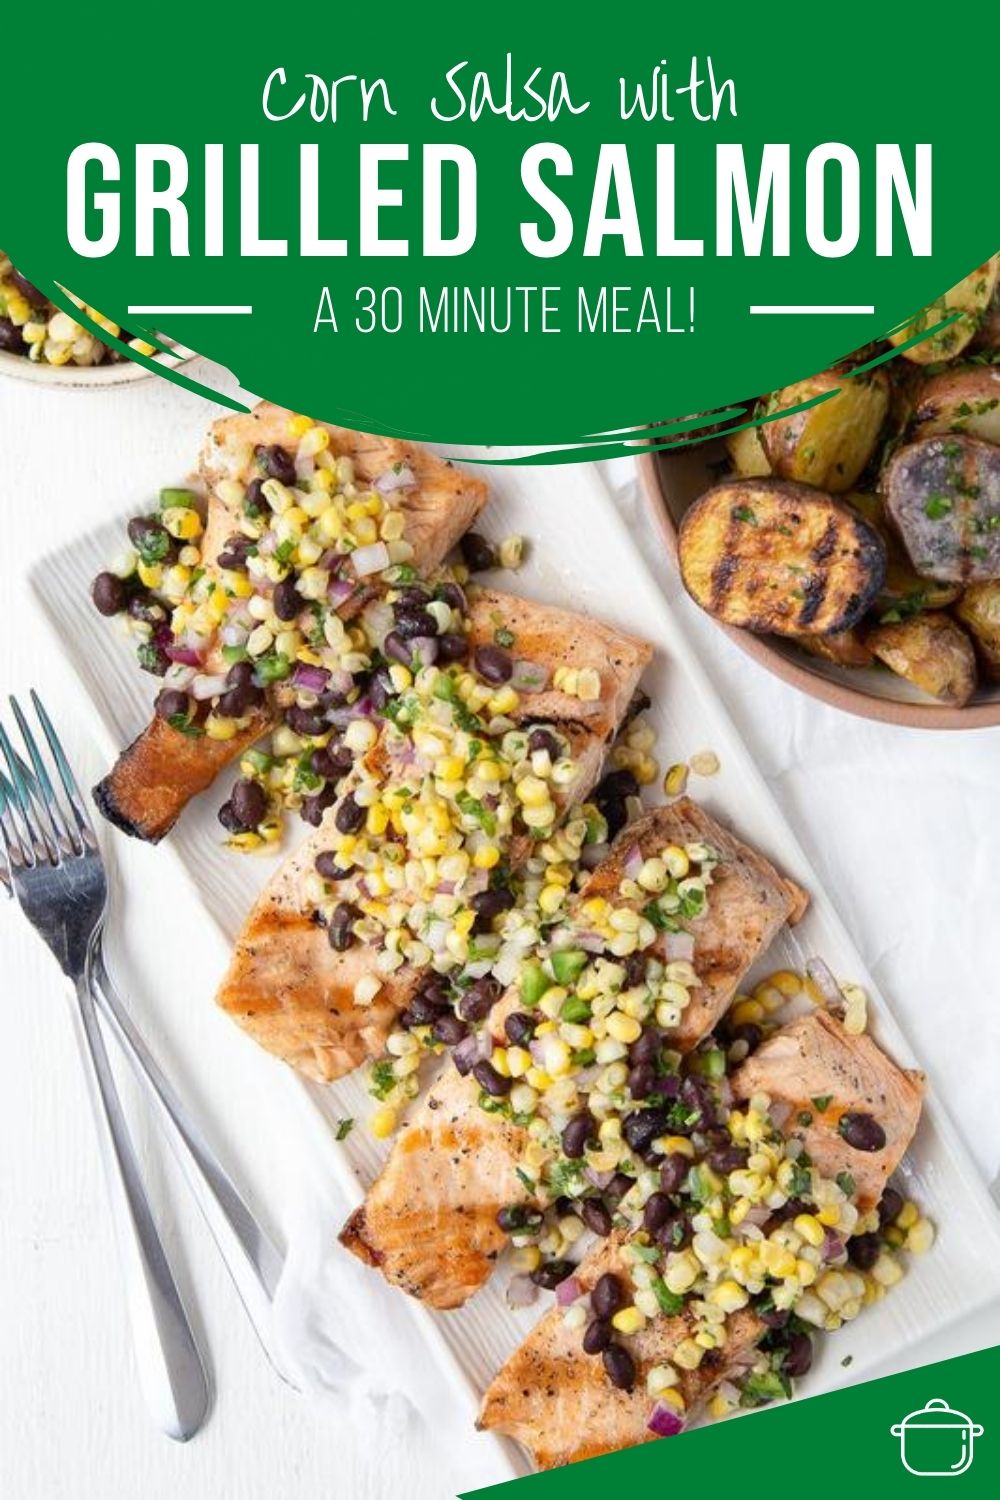 Grilled Salmon with Black Bean and Corn Salsa - Gift of Hospitality